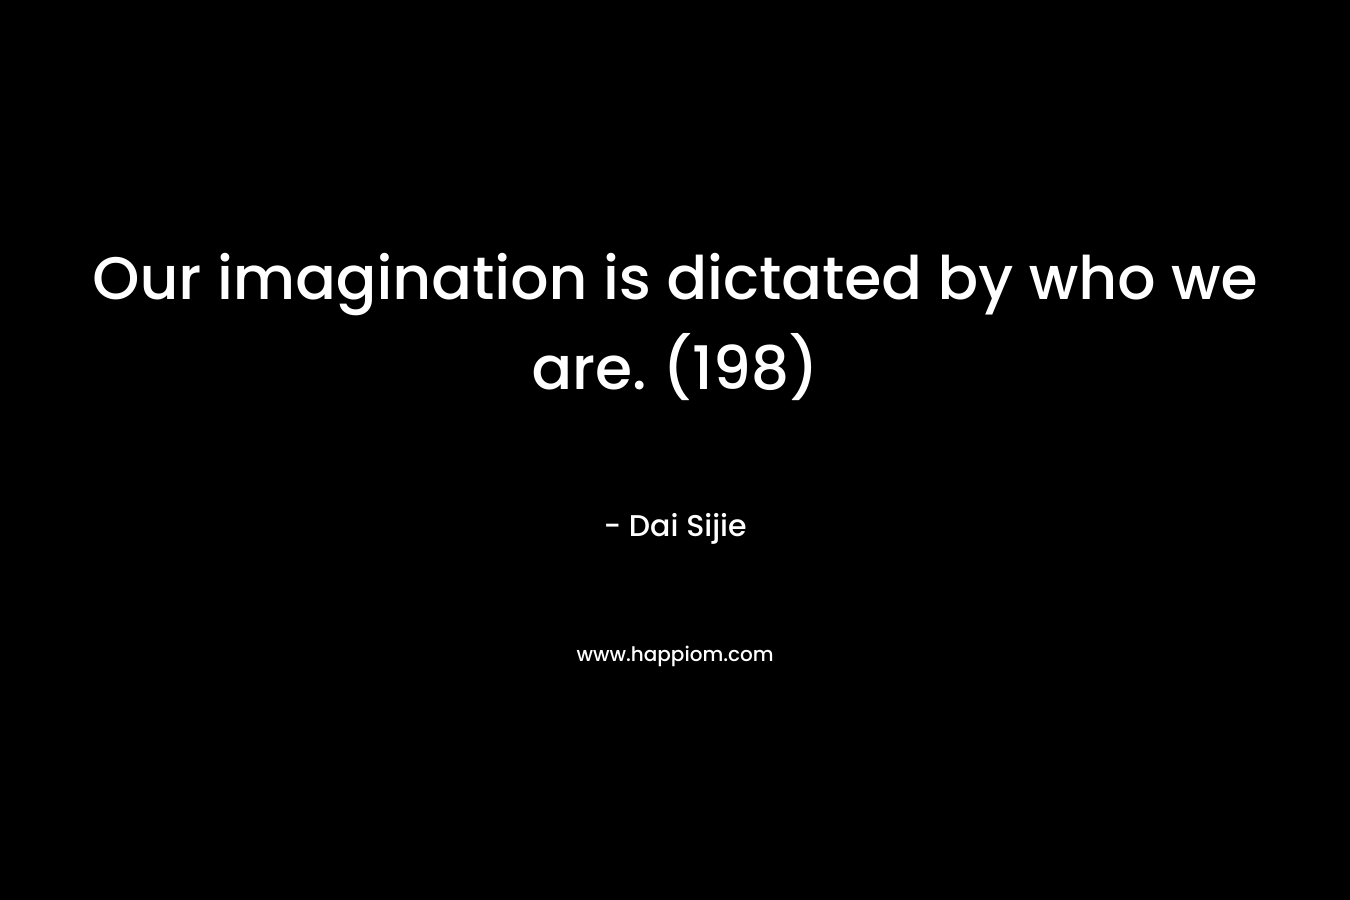 Our imagination is dictated by who we are. (198) – Dai Sijie